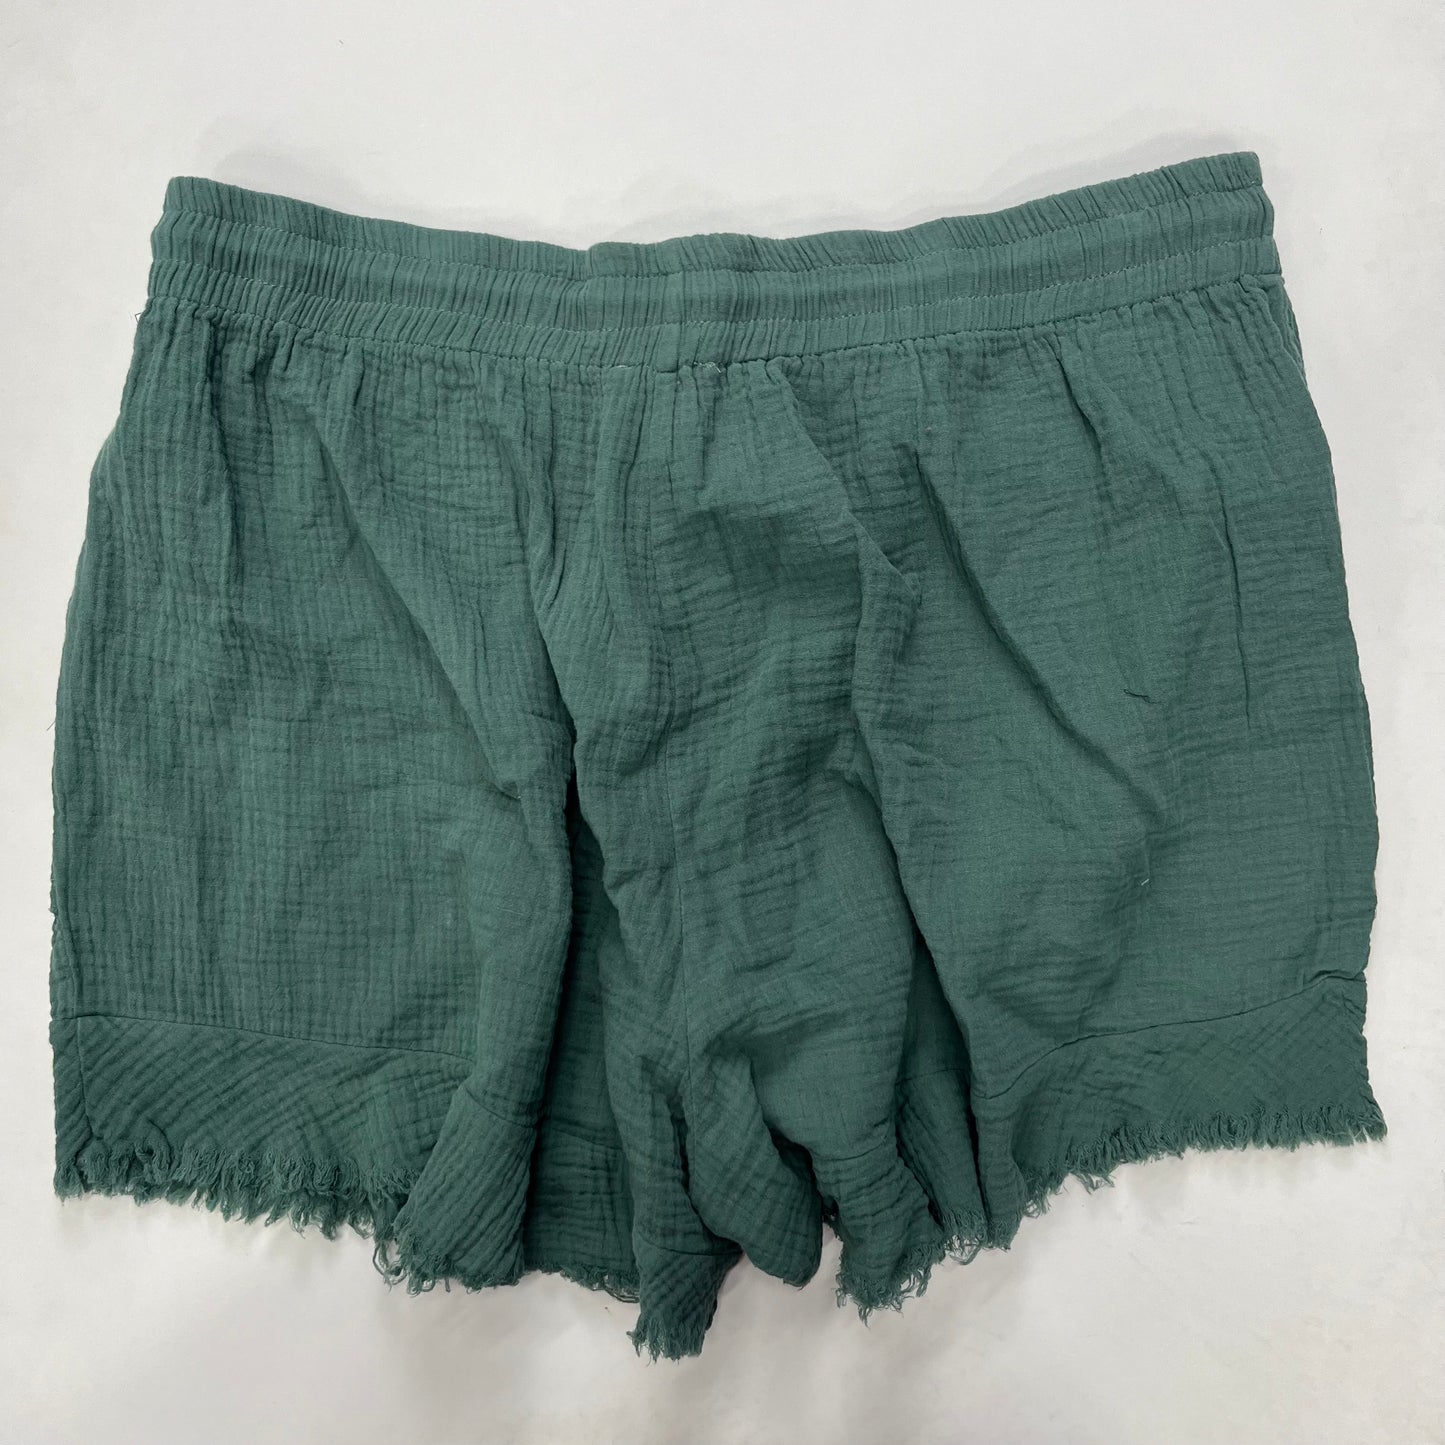 Green Shorts Ee Some NWT, Size 1x